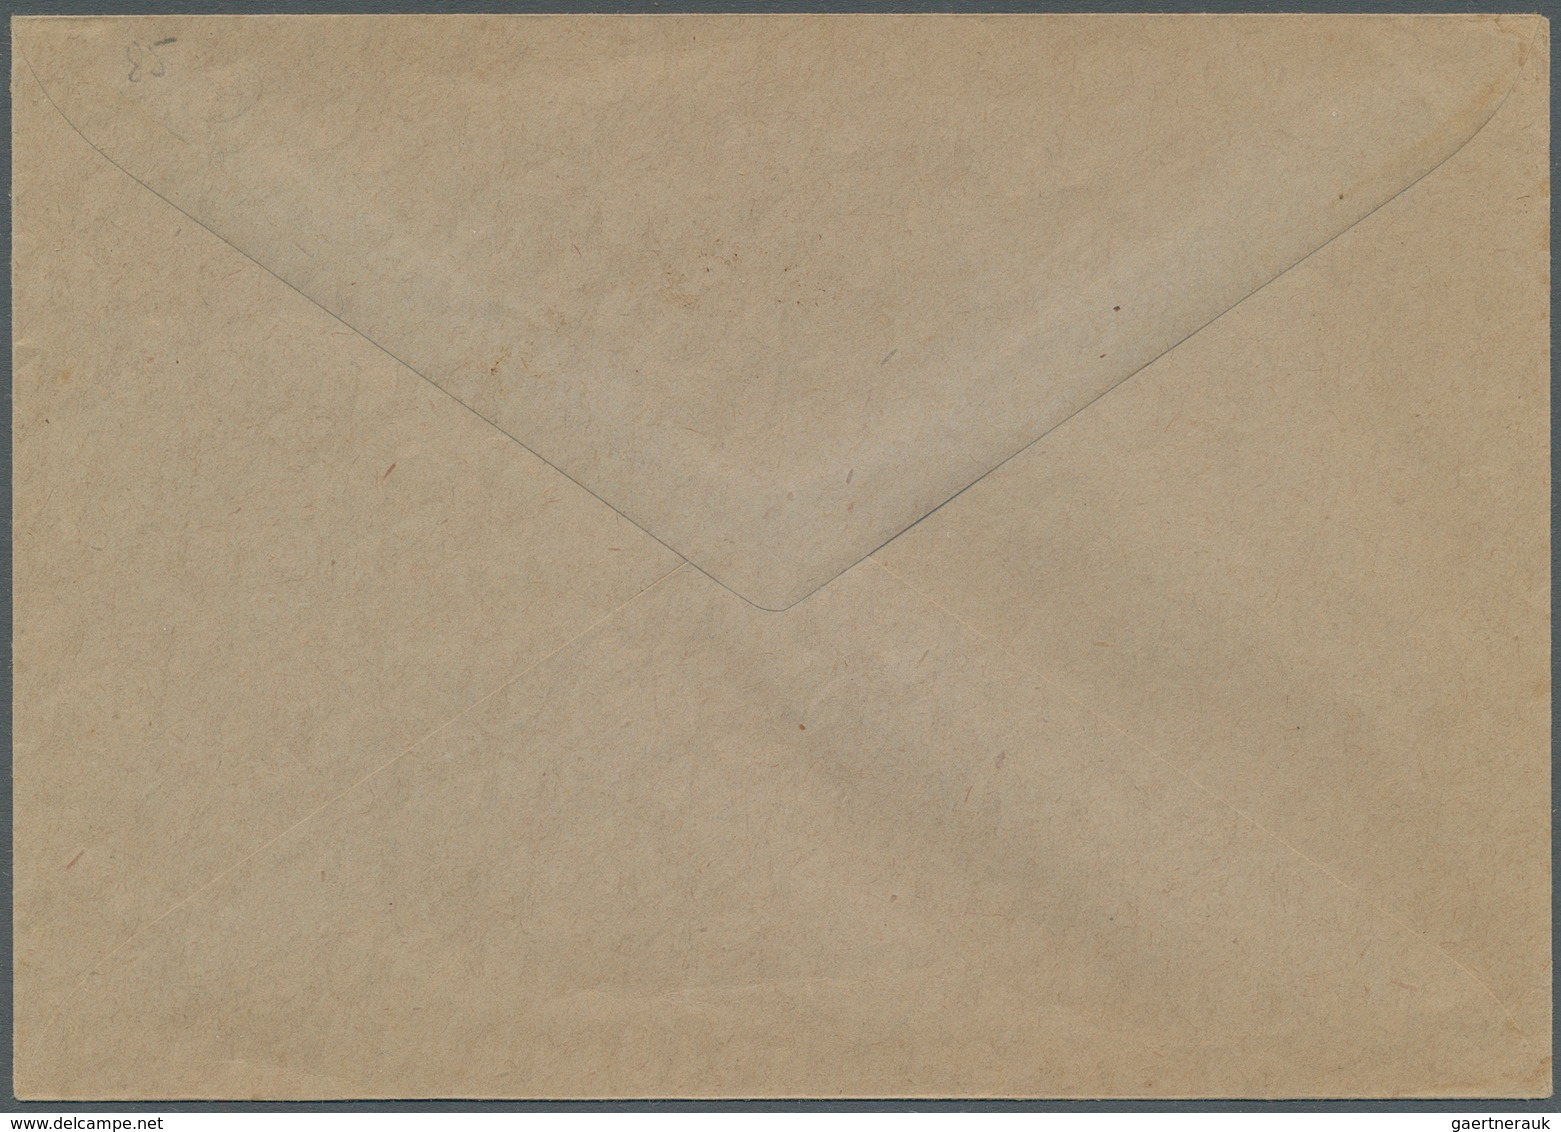 Sowjetunion - Ganzsachen: 1931/35 9 Unused And Used Pictured Postal Stationery Envelopes With Some R - Non Classés